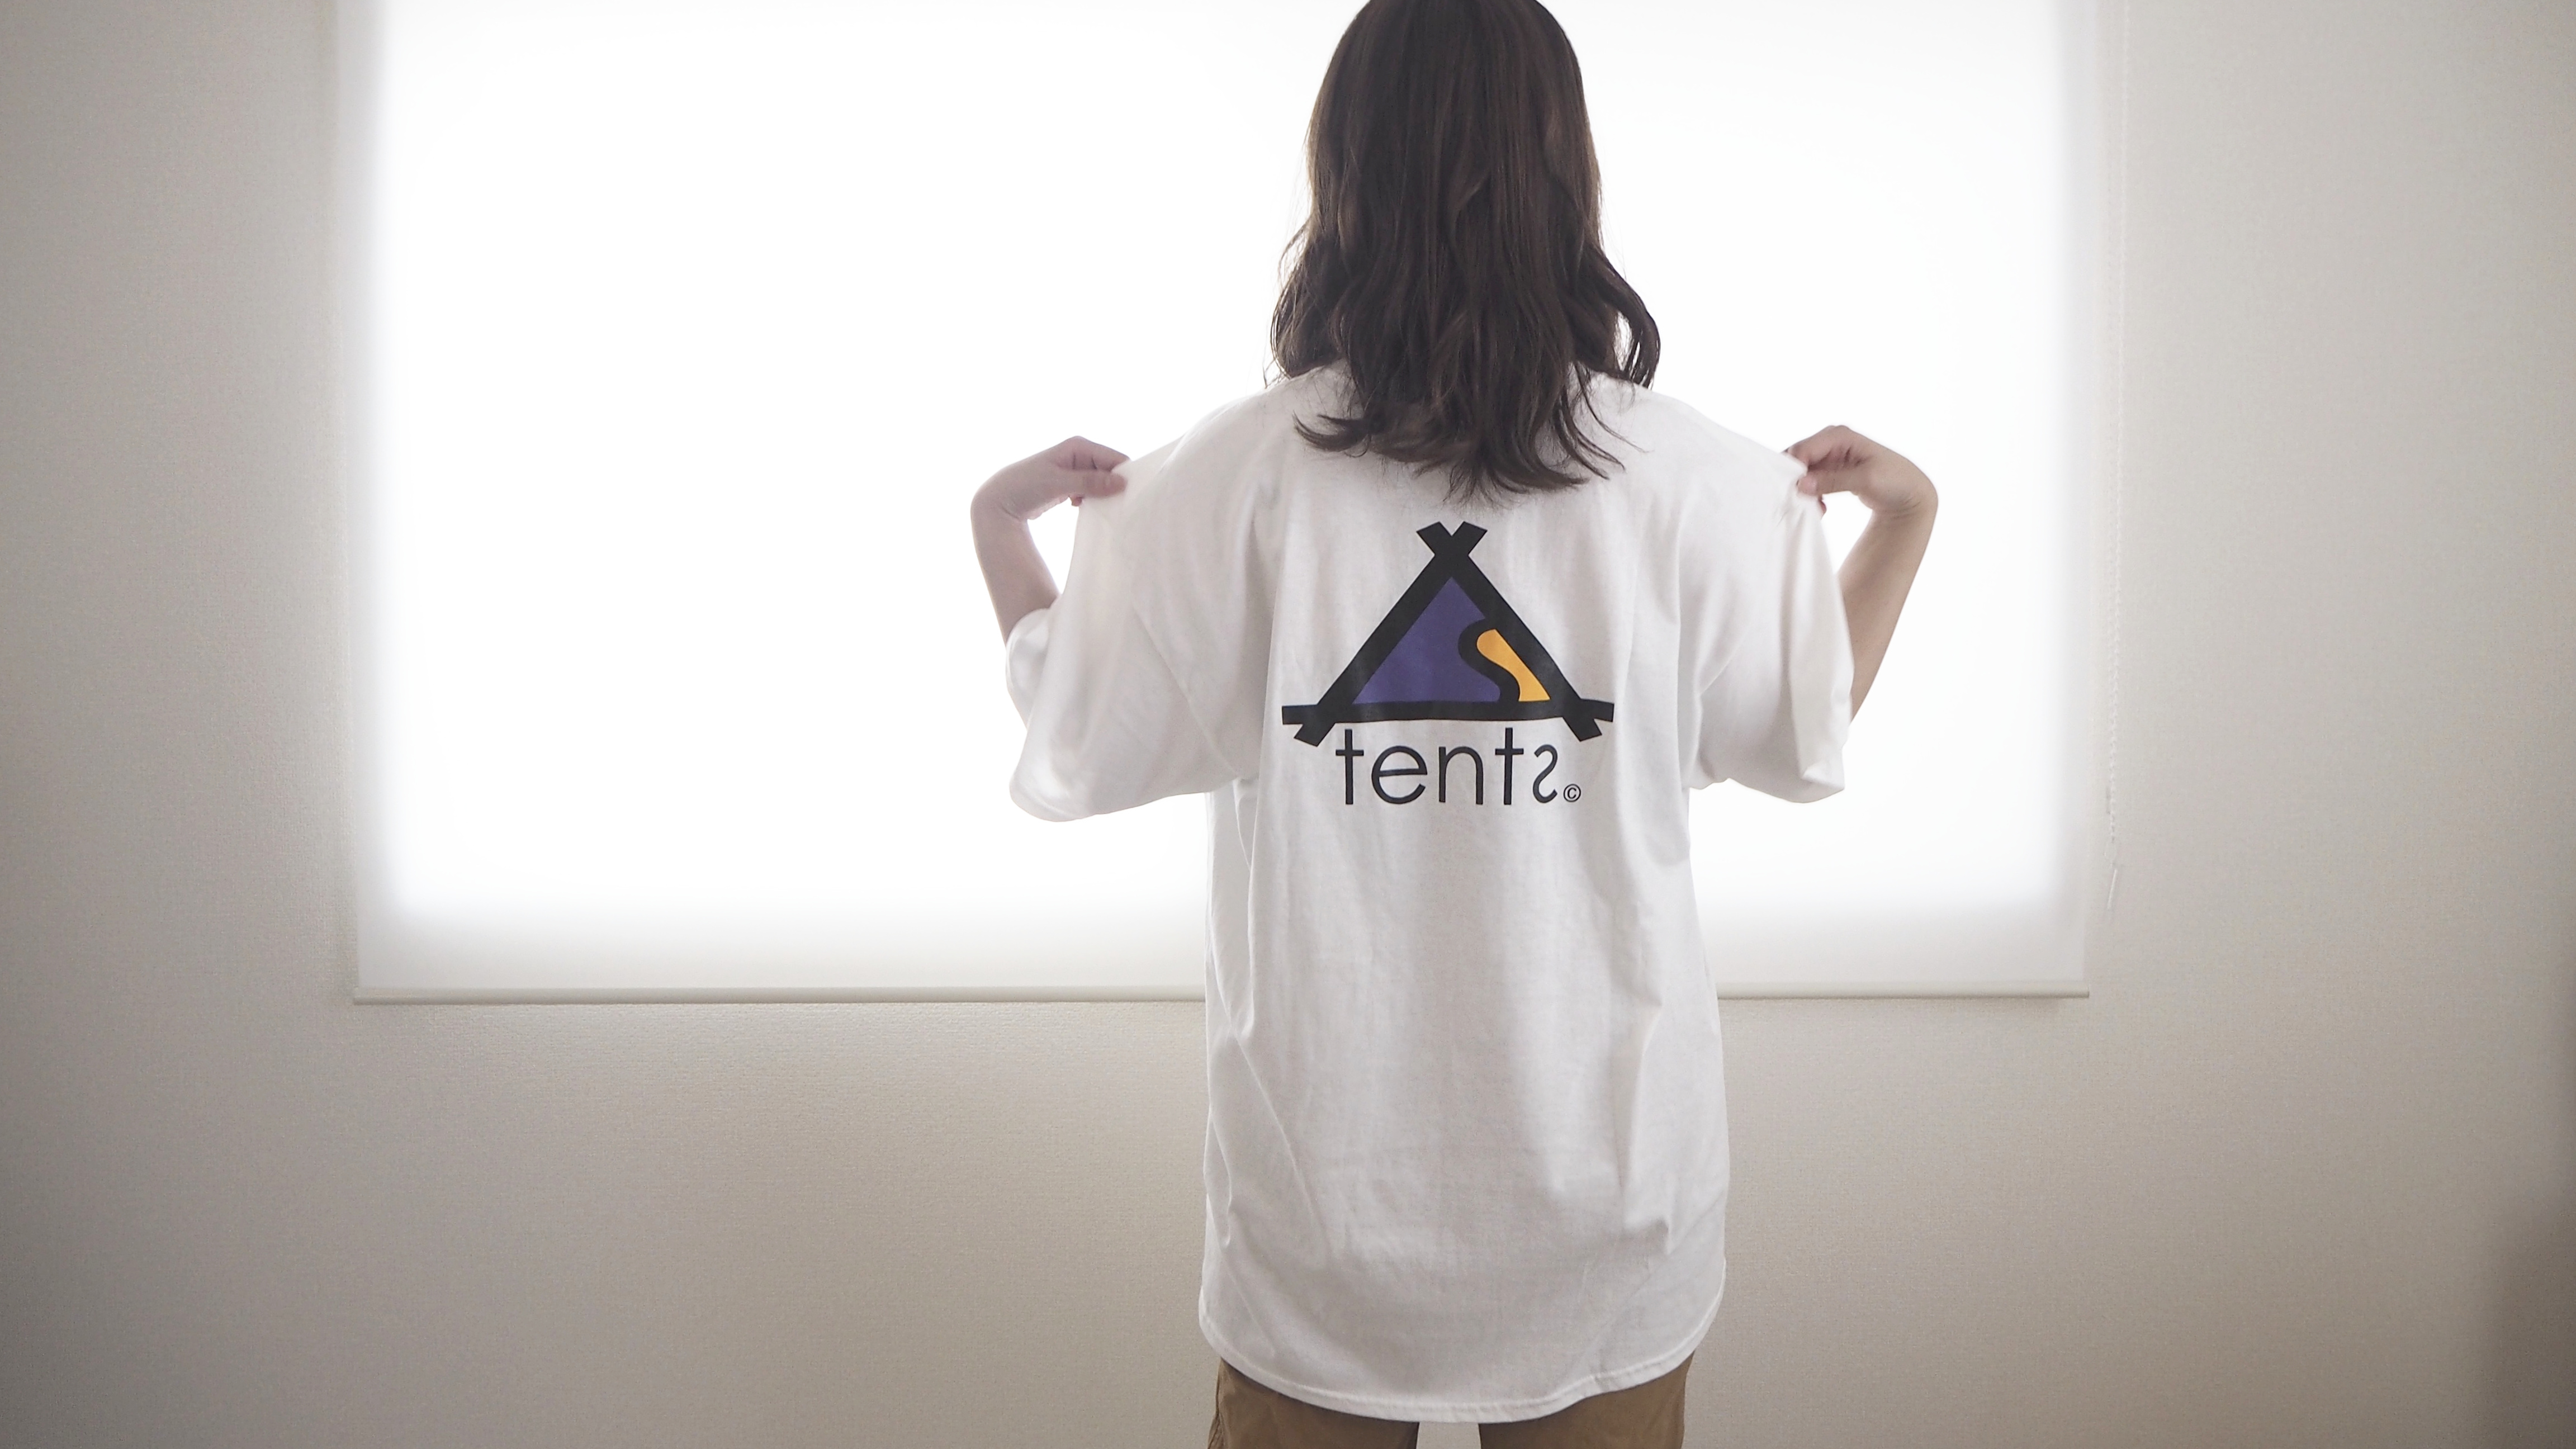 tents t-shirt for woman